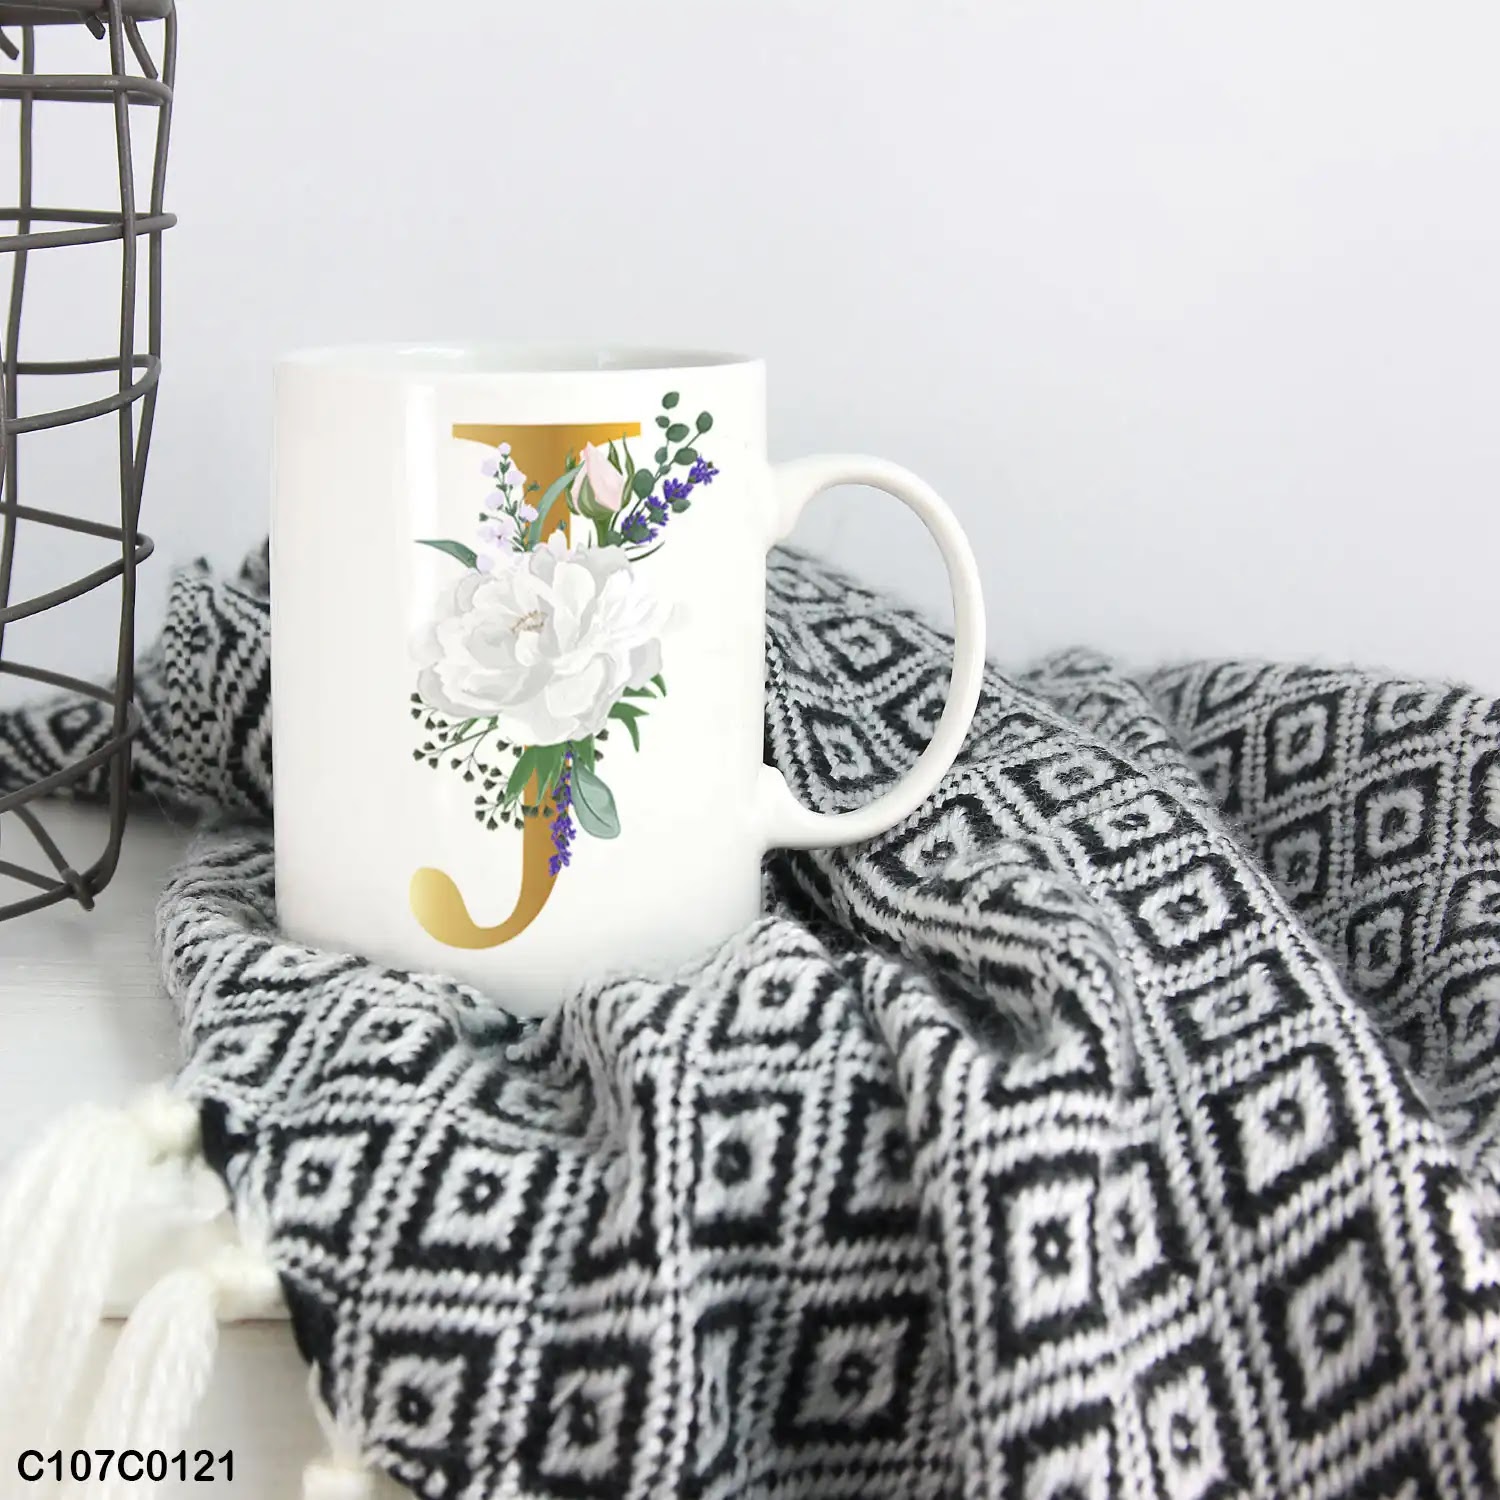 A white mug (cup) printed with gold Letter "J" and small white branch